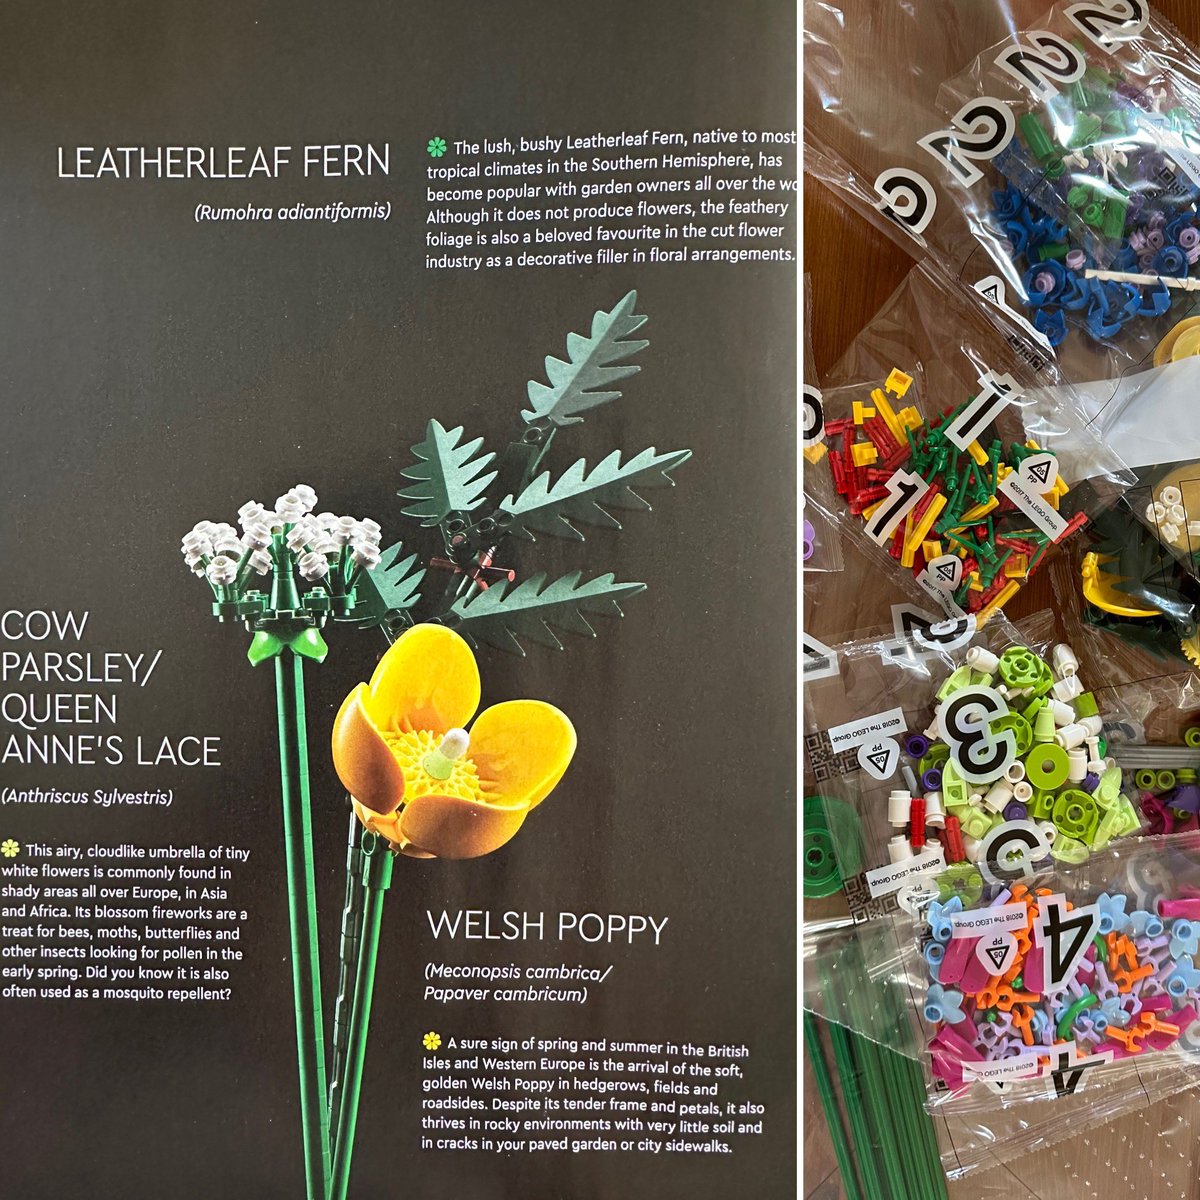 Finally getting around to some of my birthday @LEGO_Group flowers. I love how there’s info about the flowers too #ScienceIsEverywhere #BeCurious